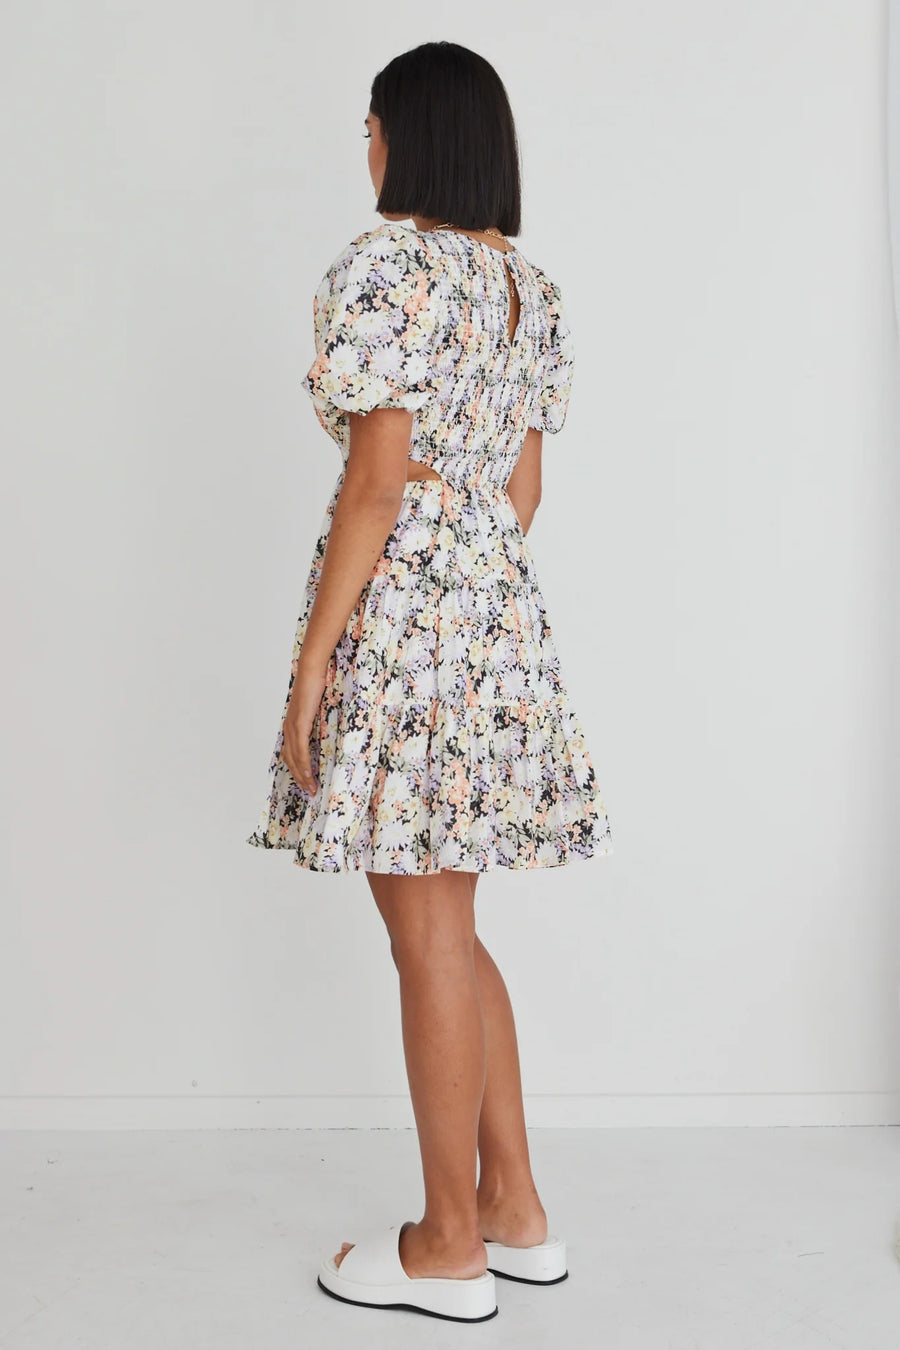 IVY + JACK HAILEY BLACK FLORAL SHIRRED COTTON PUFF SS WAIST CUT OUT TIERED MINI DRESS - WILDROSE